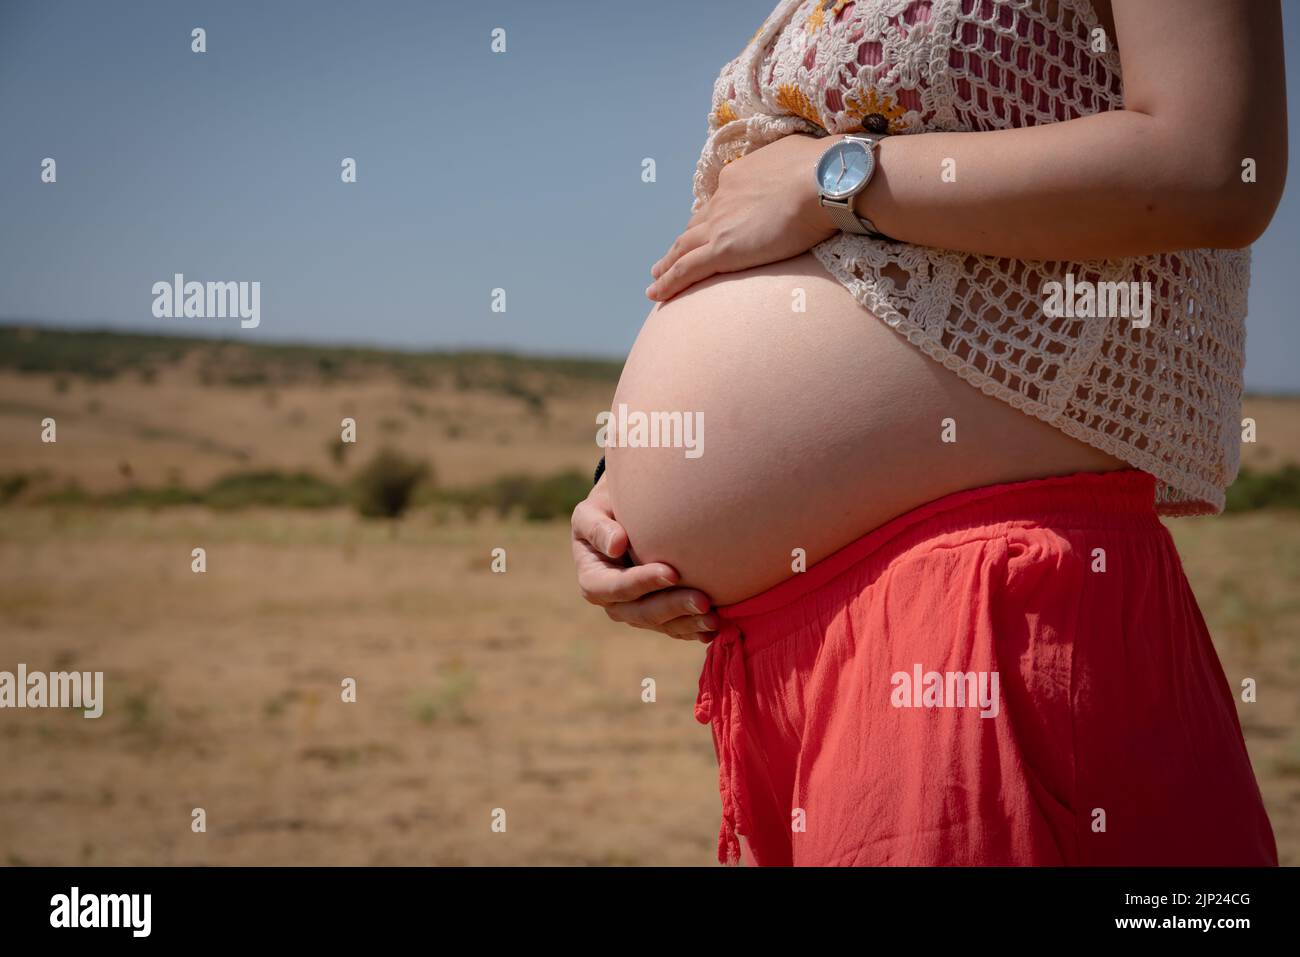 outdoors close up tummy of woman enjoying summer holiday while pregnant holding her  belly happy and proud as mother expecting baby concept Stock Photo